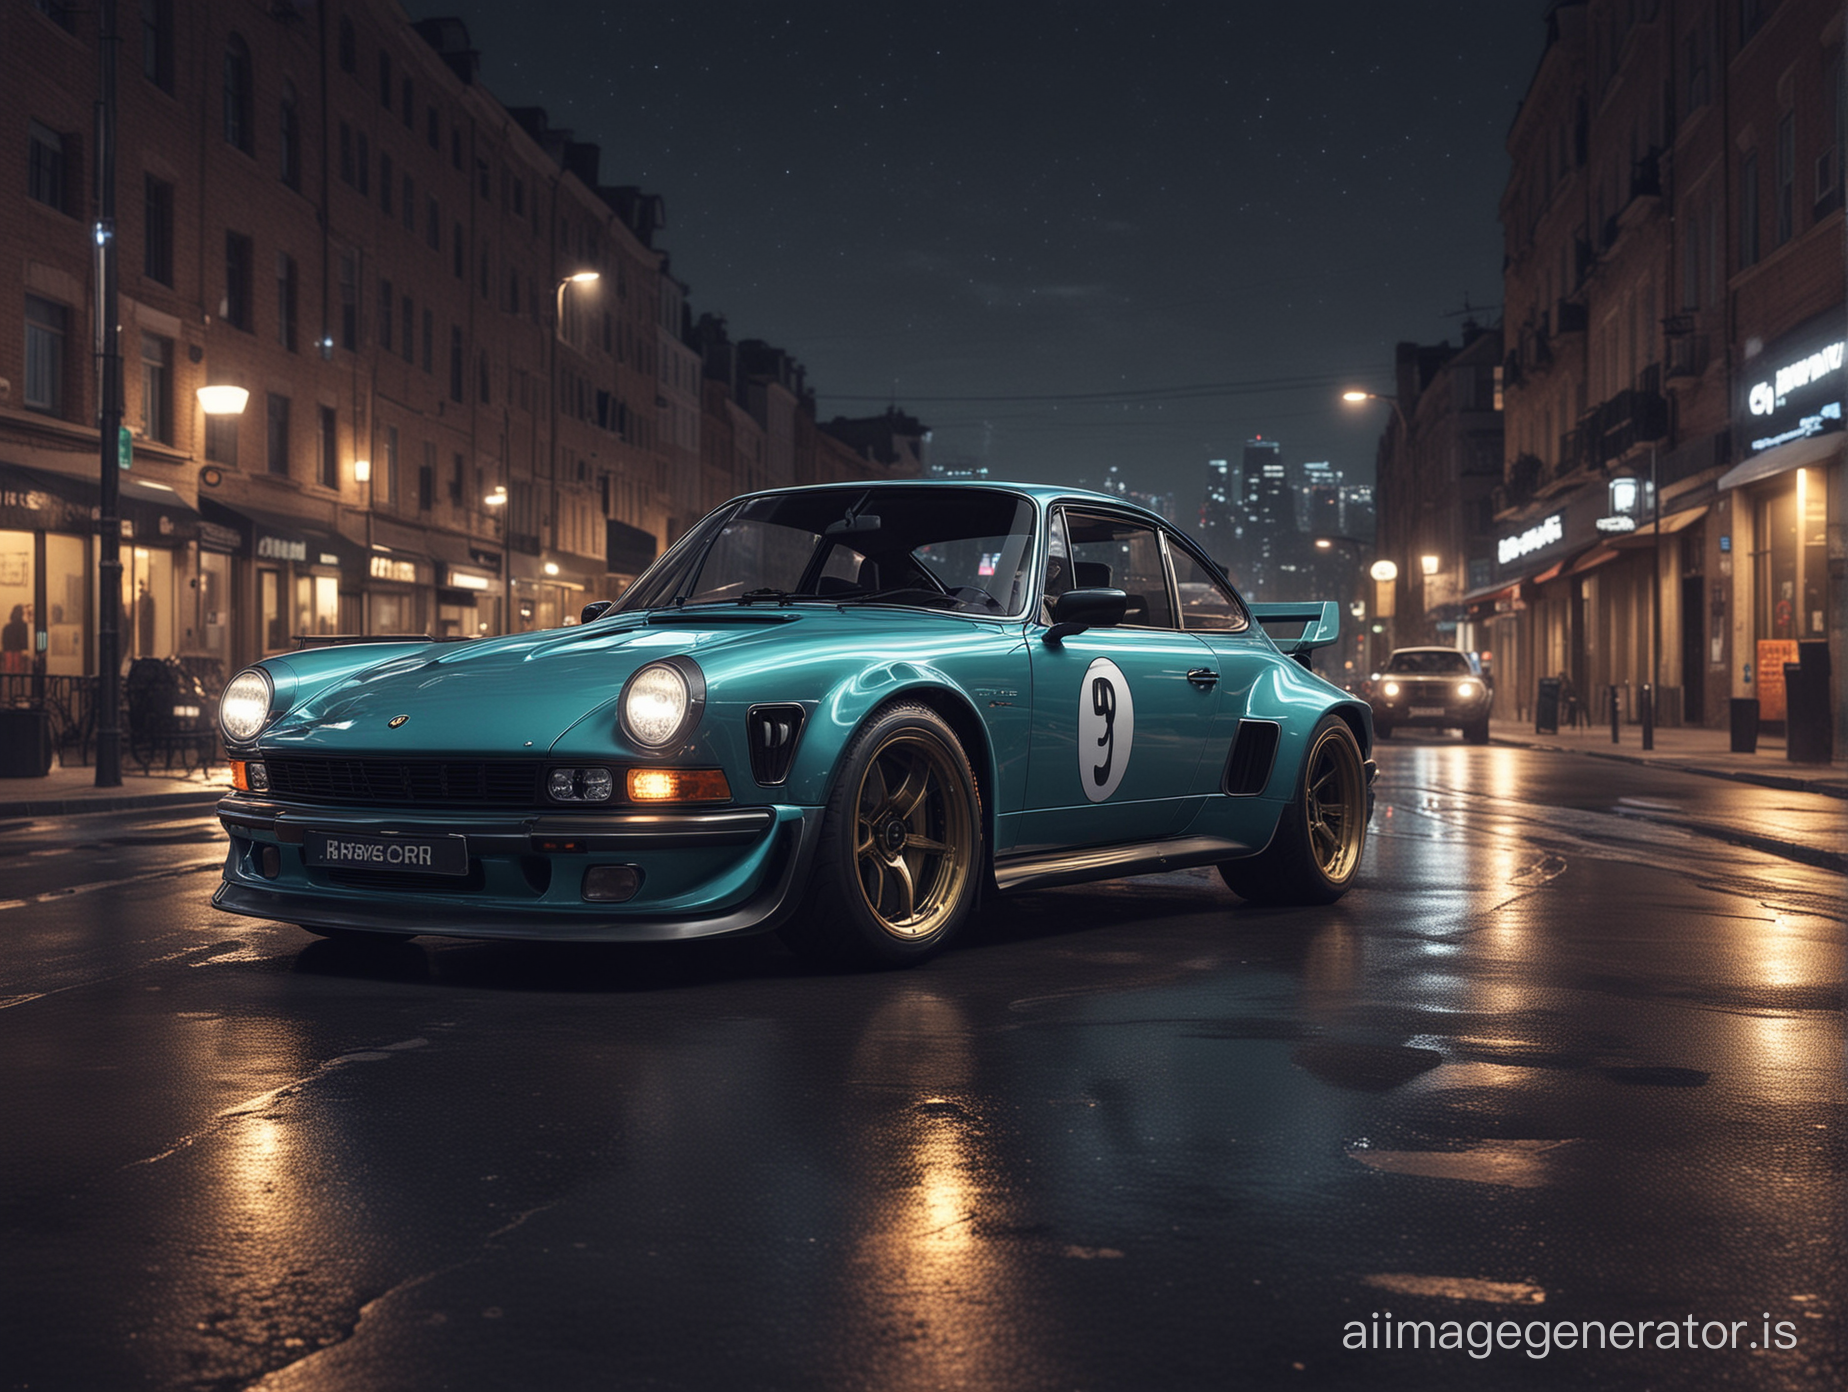 Khyzyl Saleem rendition of a combination between the porsche 911 and the BMW 3.0 CSL.Strong elements of the BMW. At night in a city